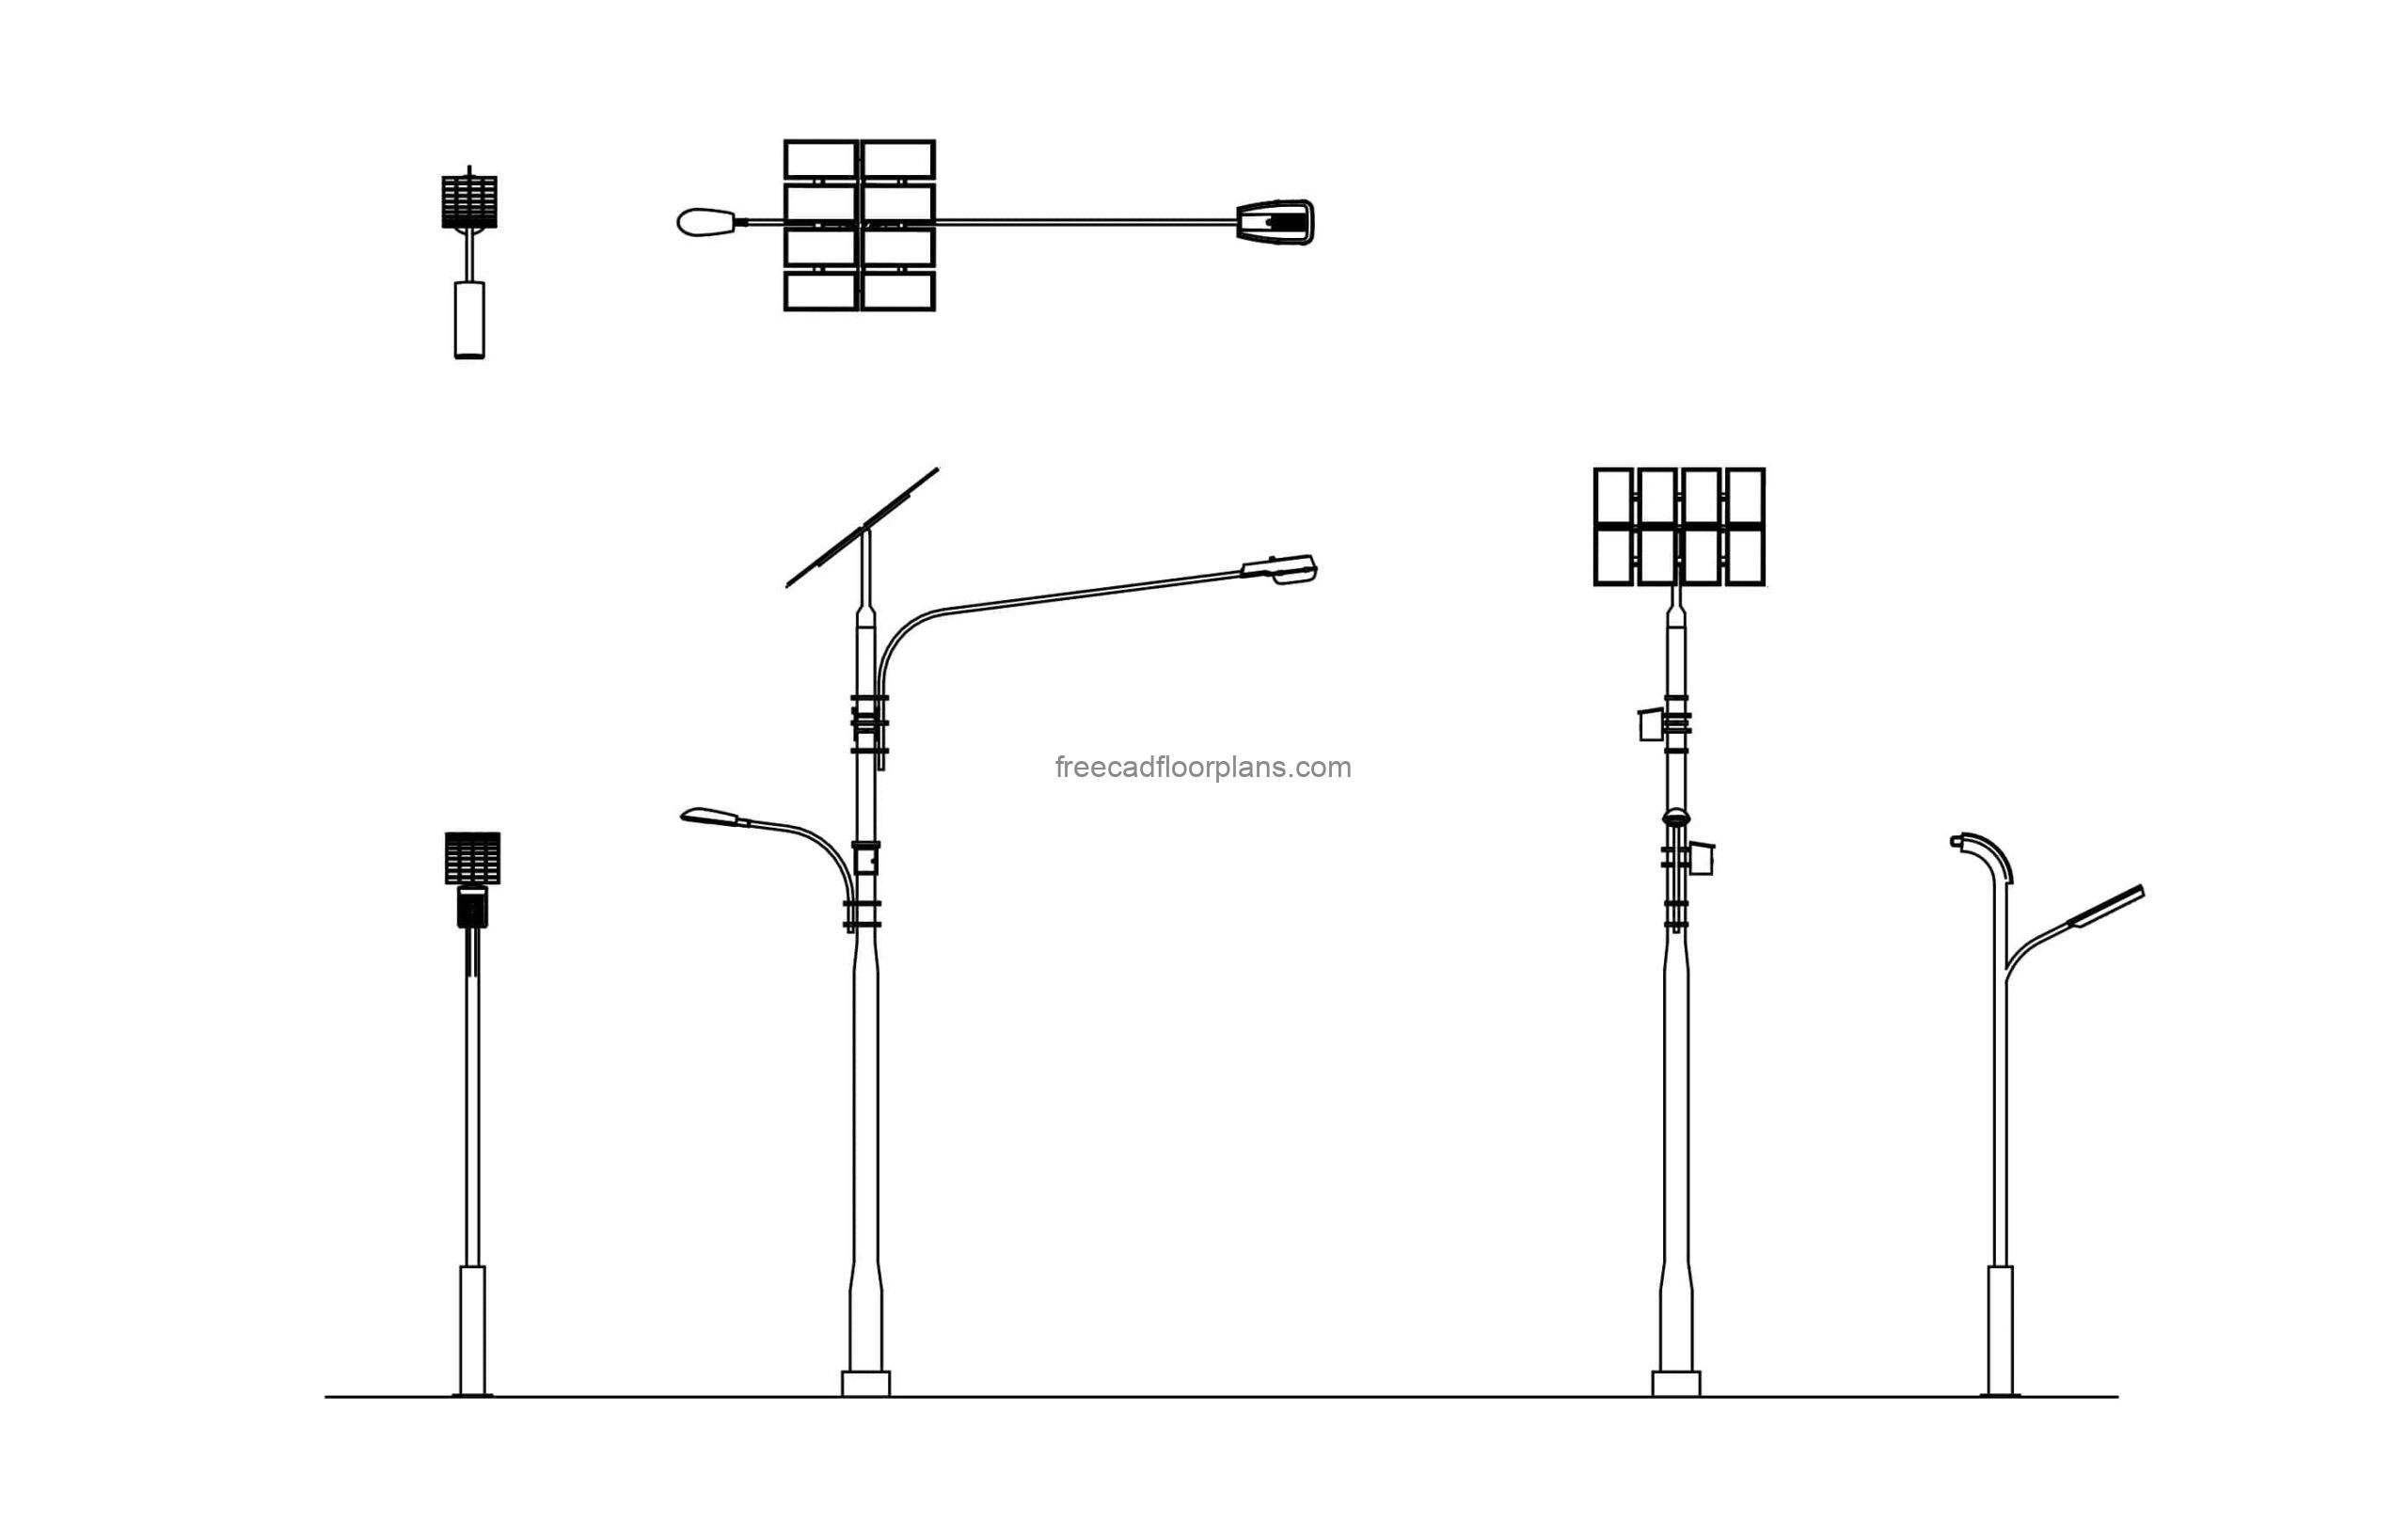 solar street lights autocad drawing cad block plan and elevations 2d views for free download